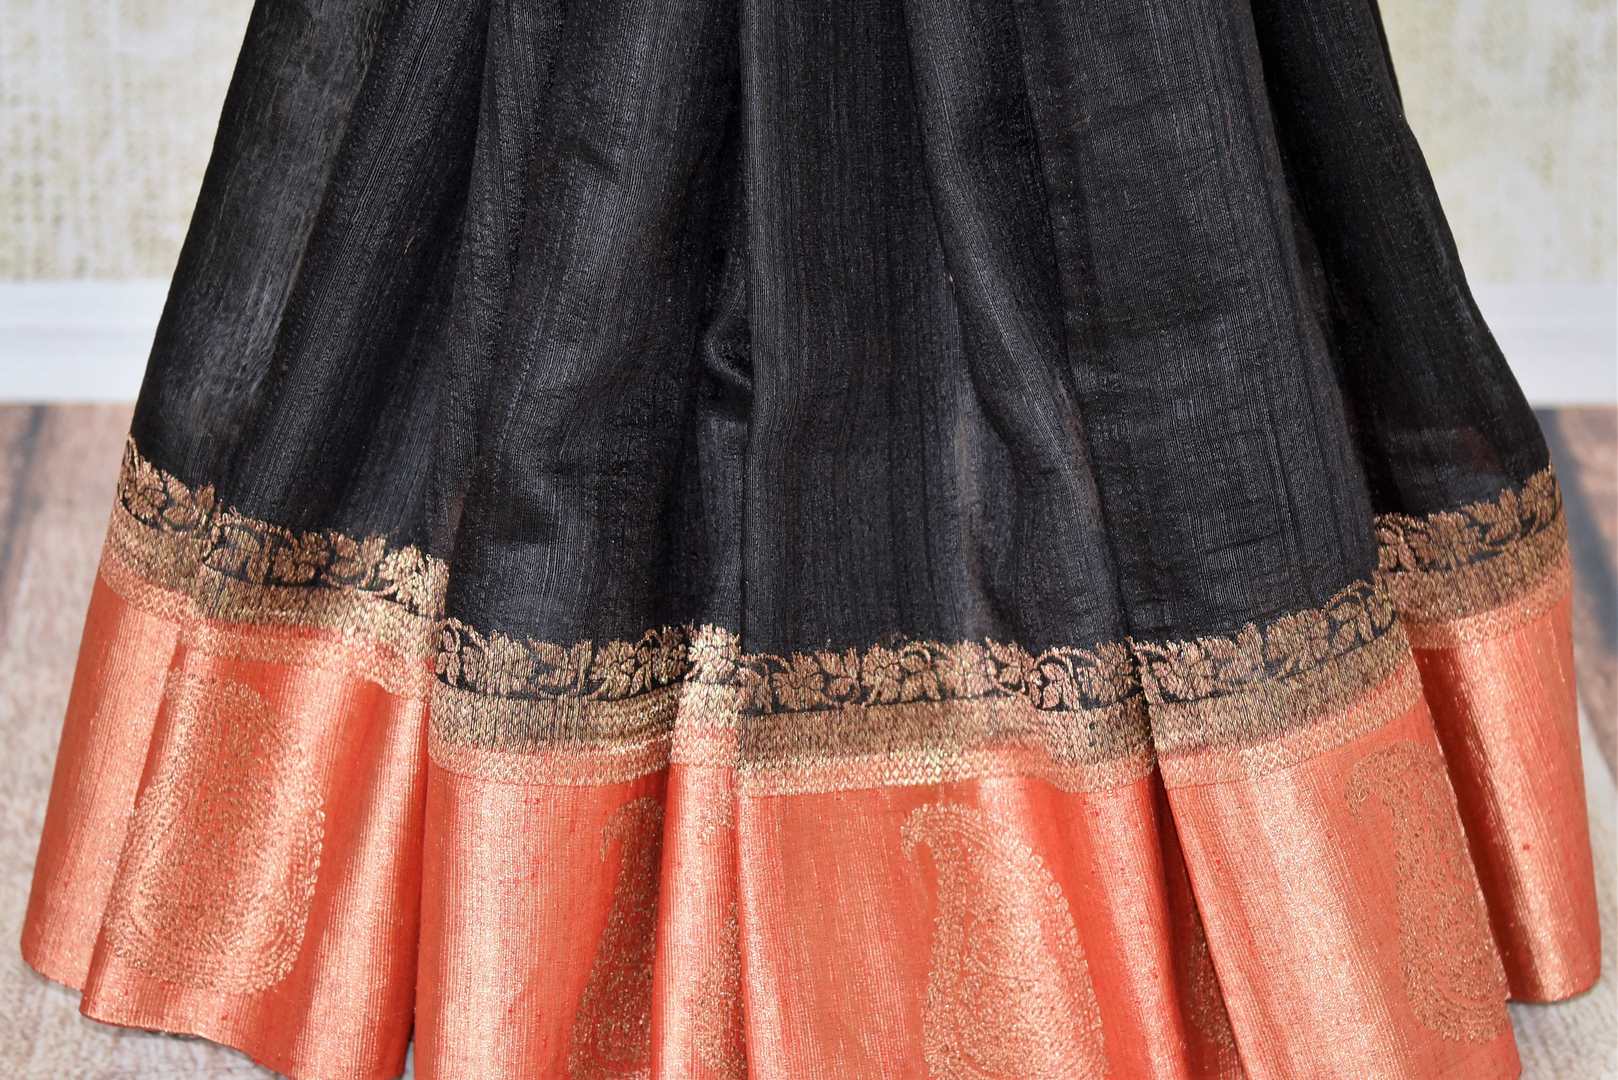 Buy black tussar Benarasi sari online in USA with red zari border and pallu. Make an elegant ethnic fashion statement at parties, weddings and special occasions with a splendid collection of Indian designer sarees, Banarasi saris, handloom saris from Pure Elegance Indian clothing store in USA or shop online.-pleats